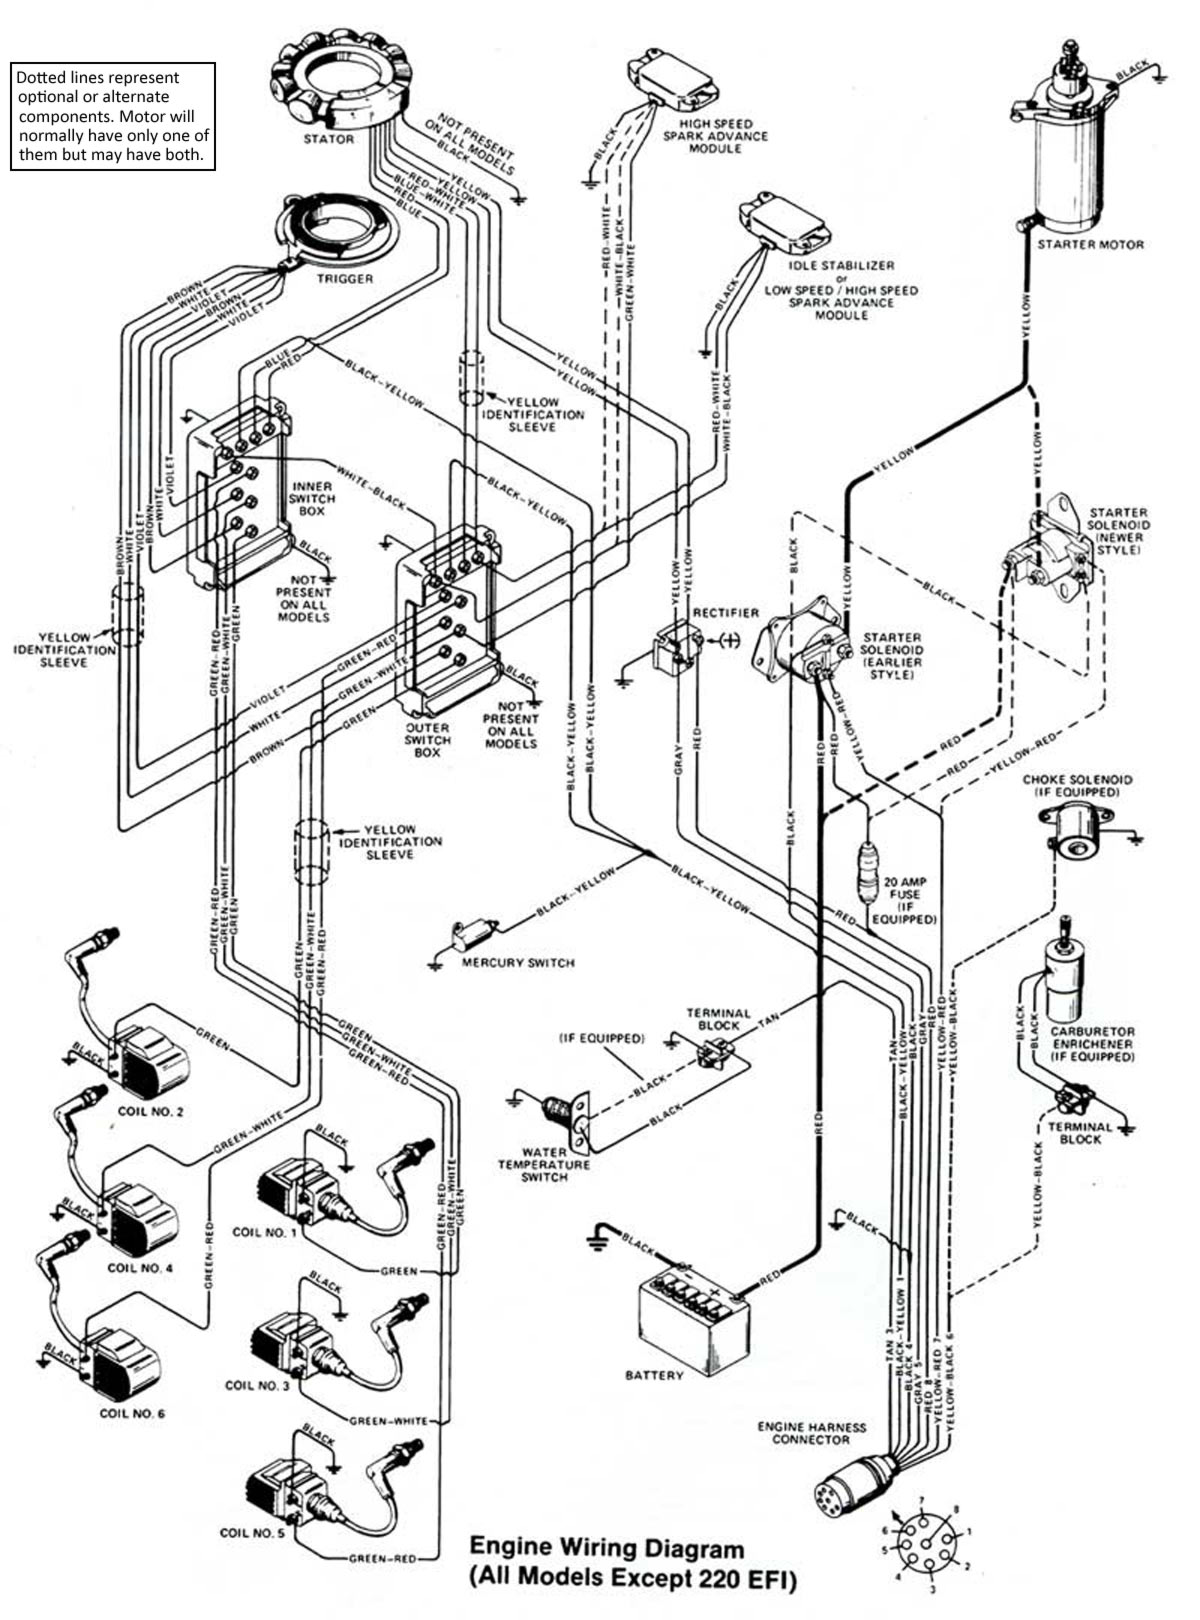 50 Hp Mercury Outboard Wiring Diagram / Skematics For 4.5 Hp 2 Cycle